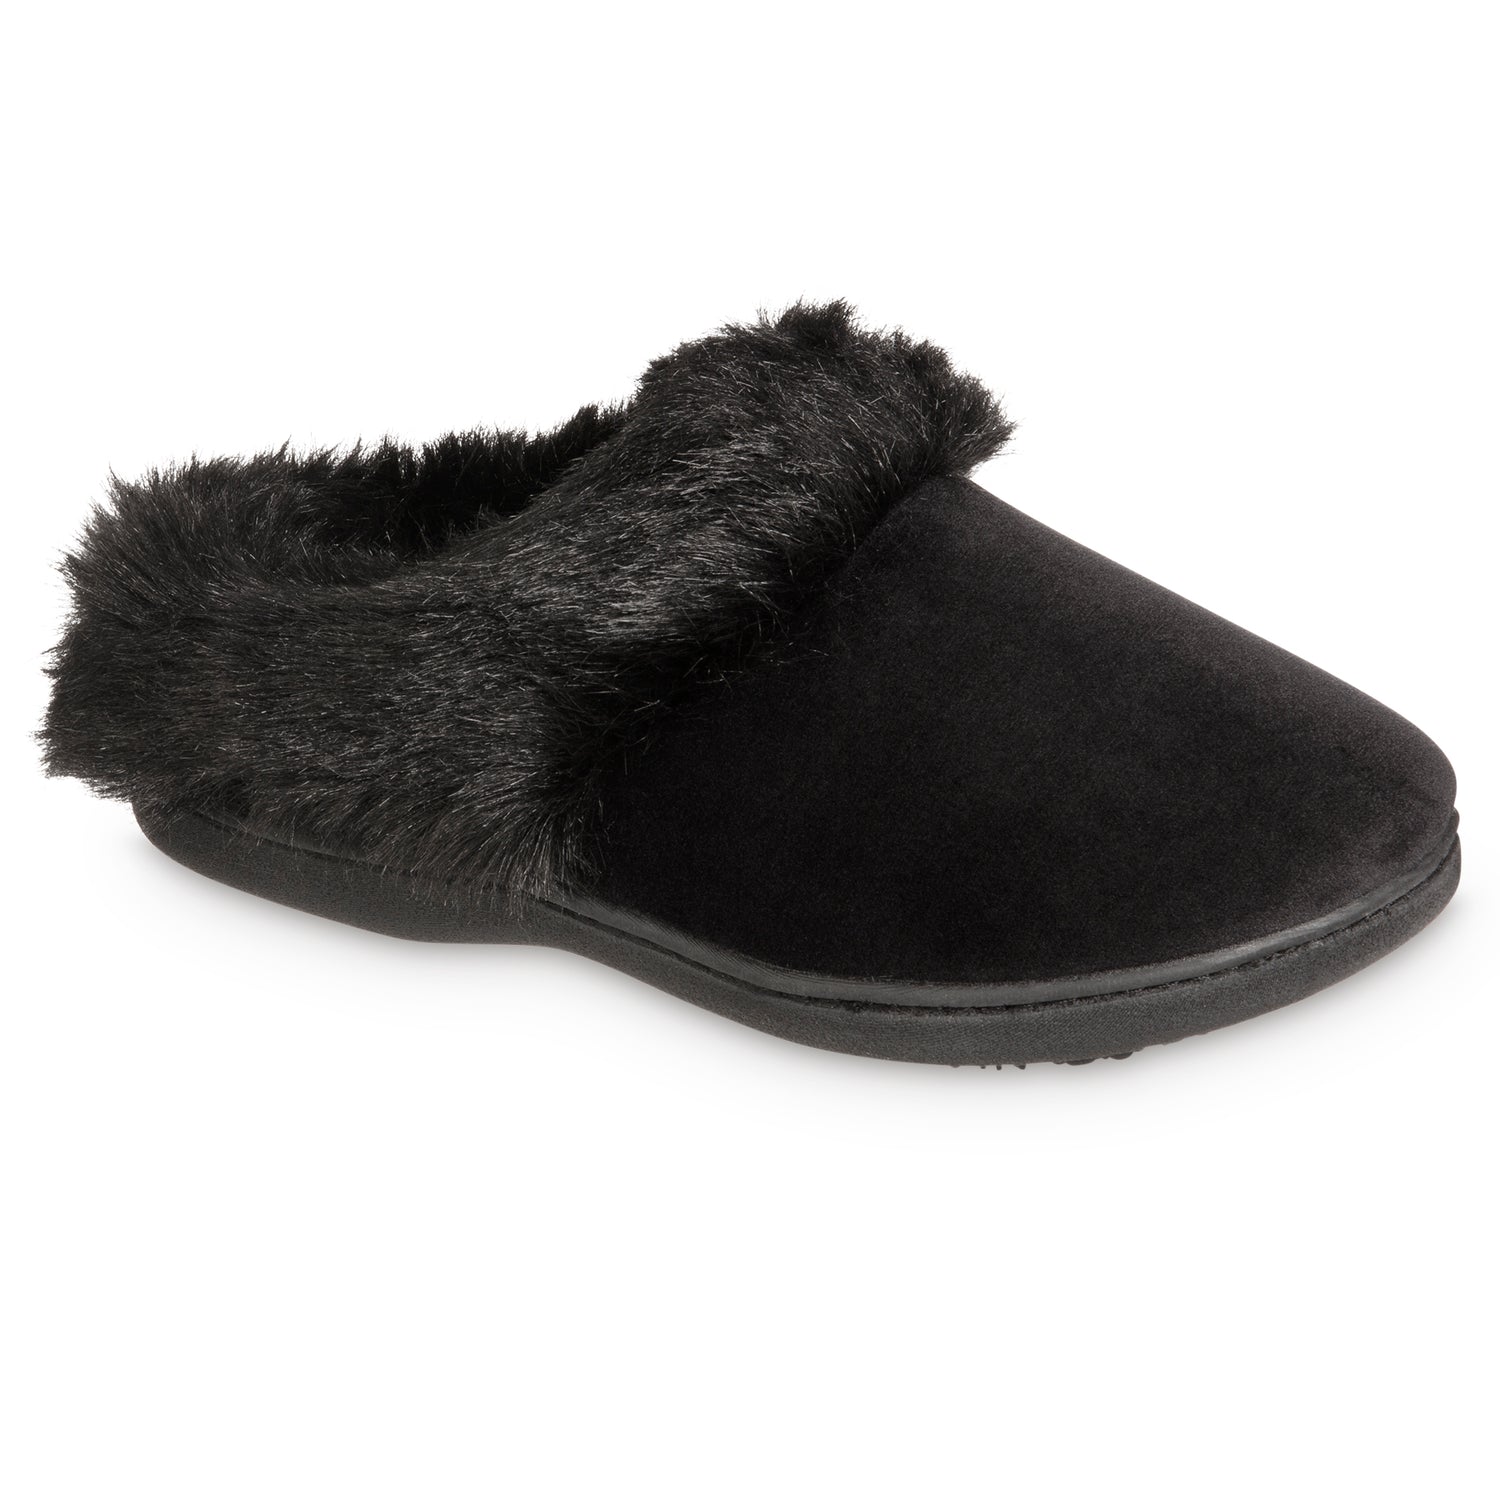 shoppers are loving these cosy memory foam fleece slippers